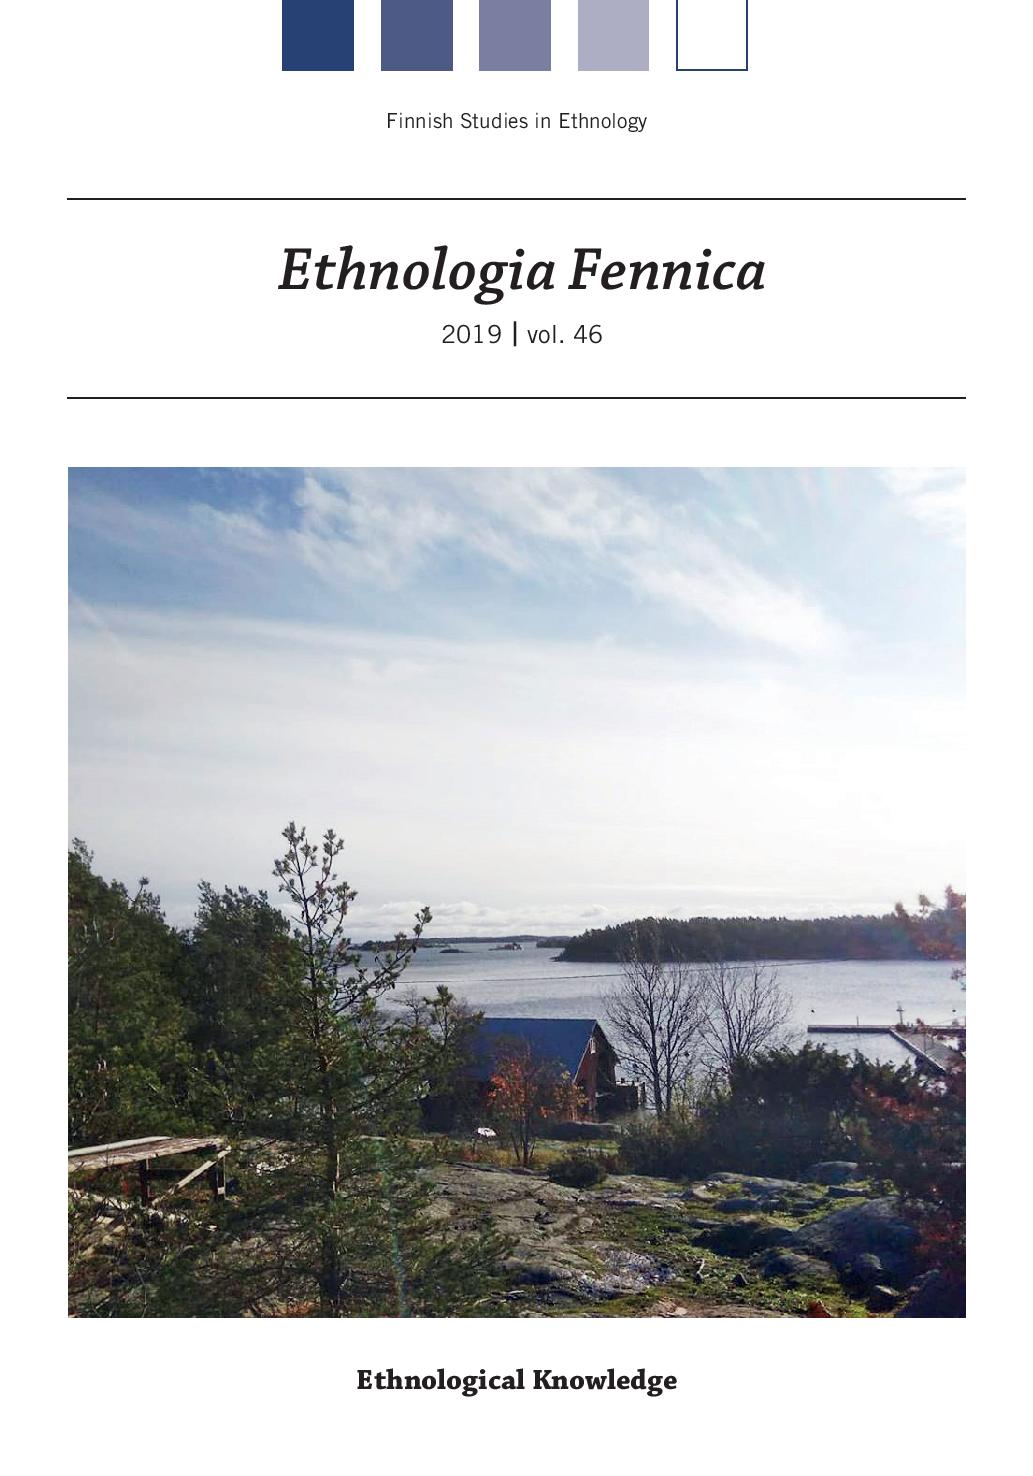 					View Vol. 46 (2019): Ethnological Knowledge
				